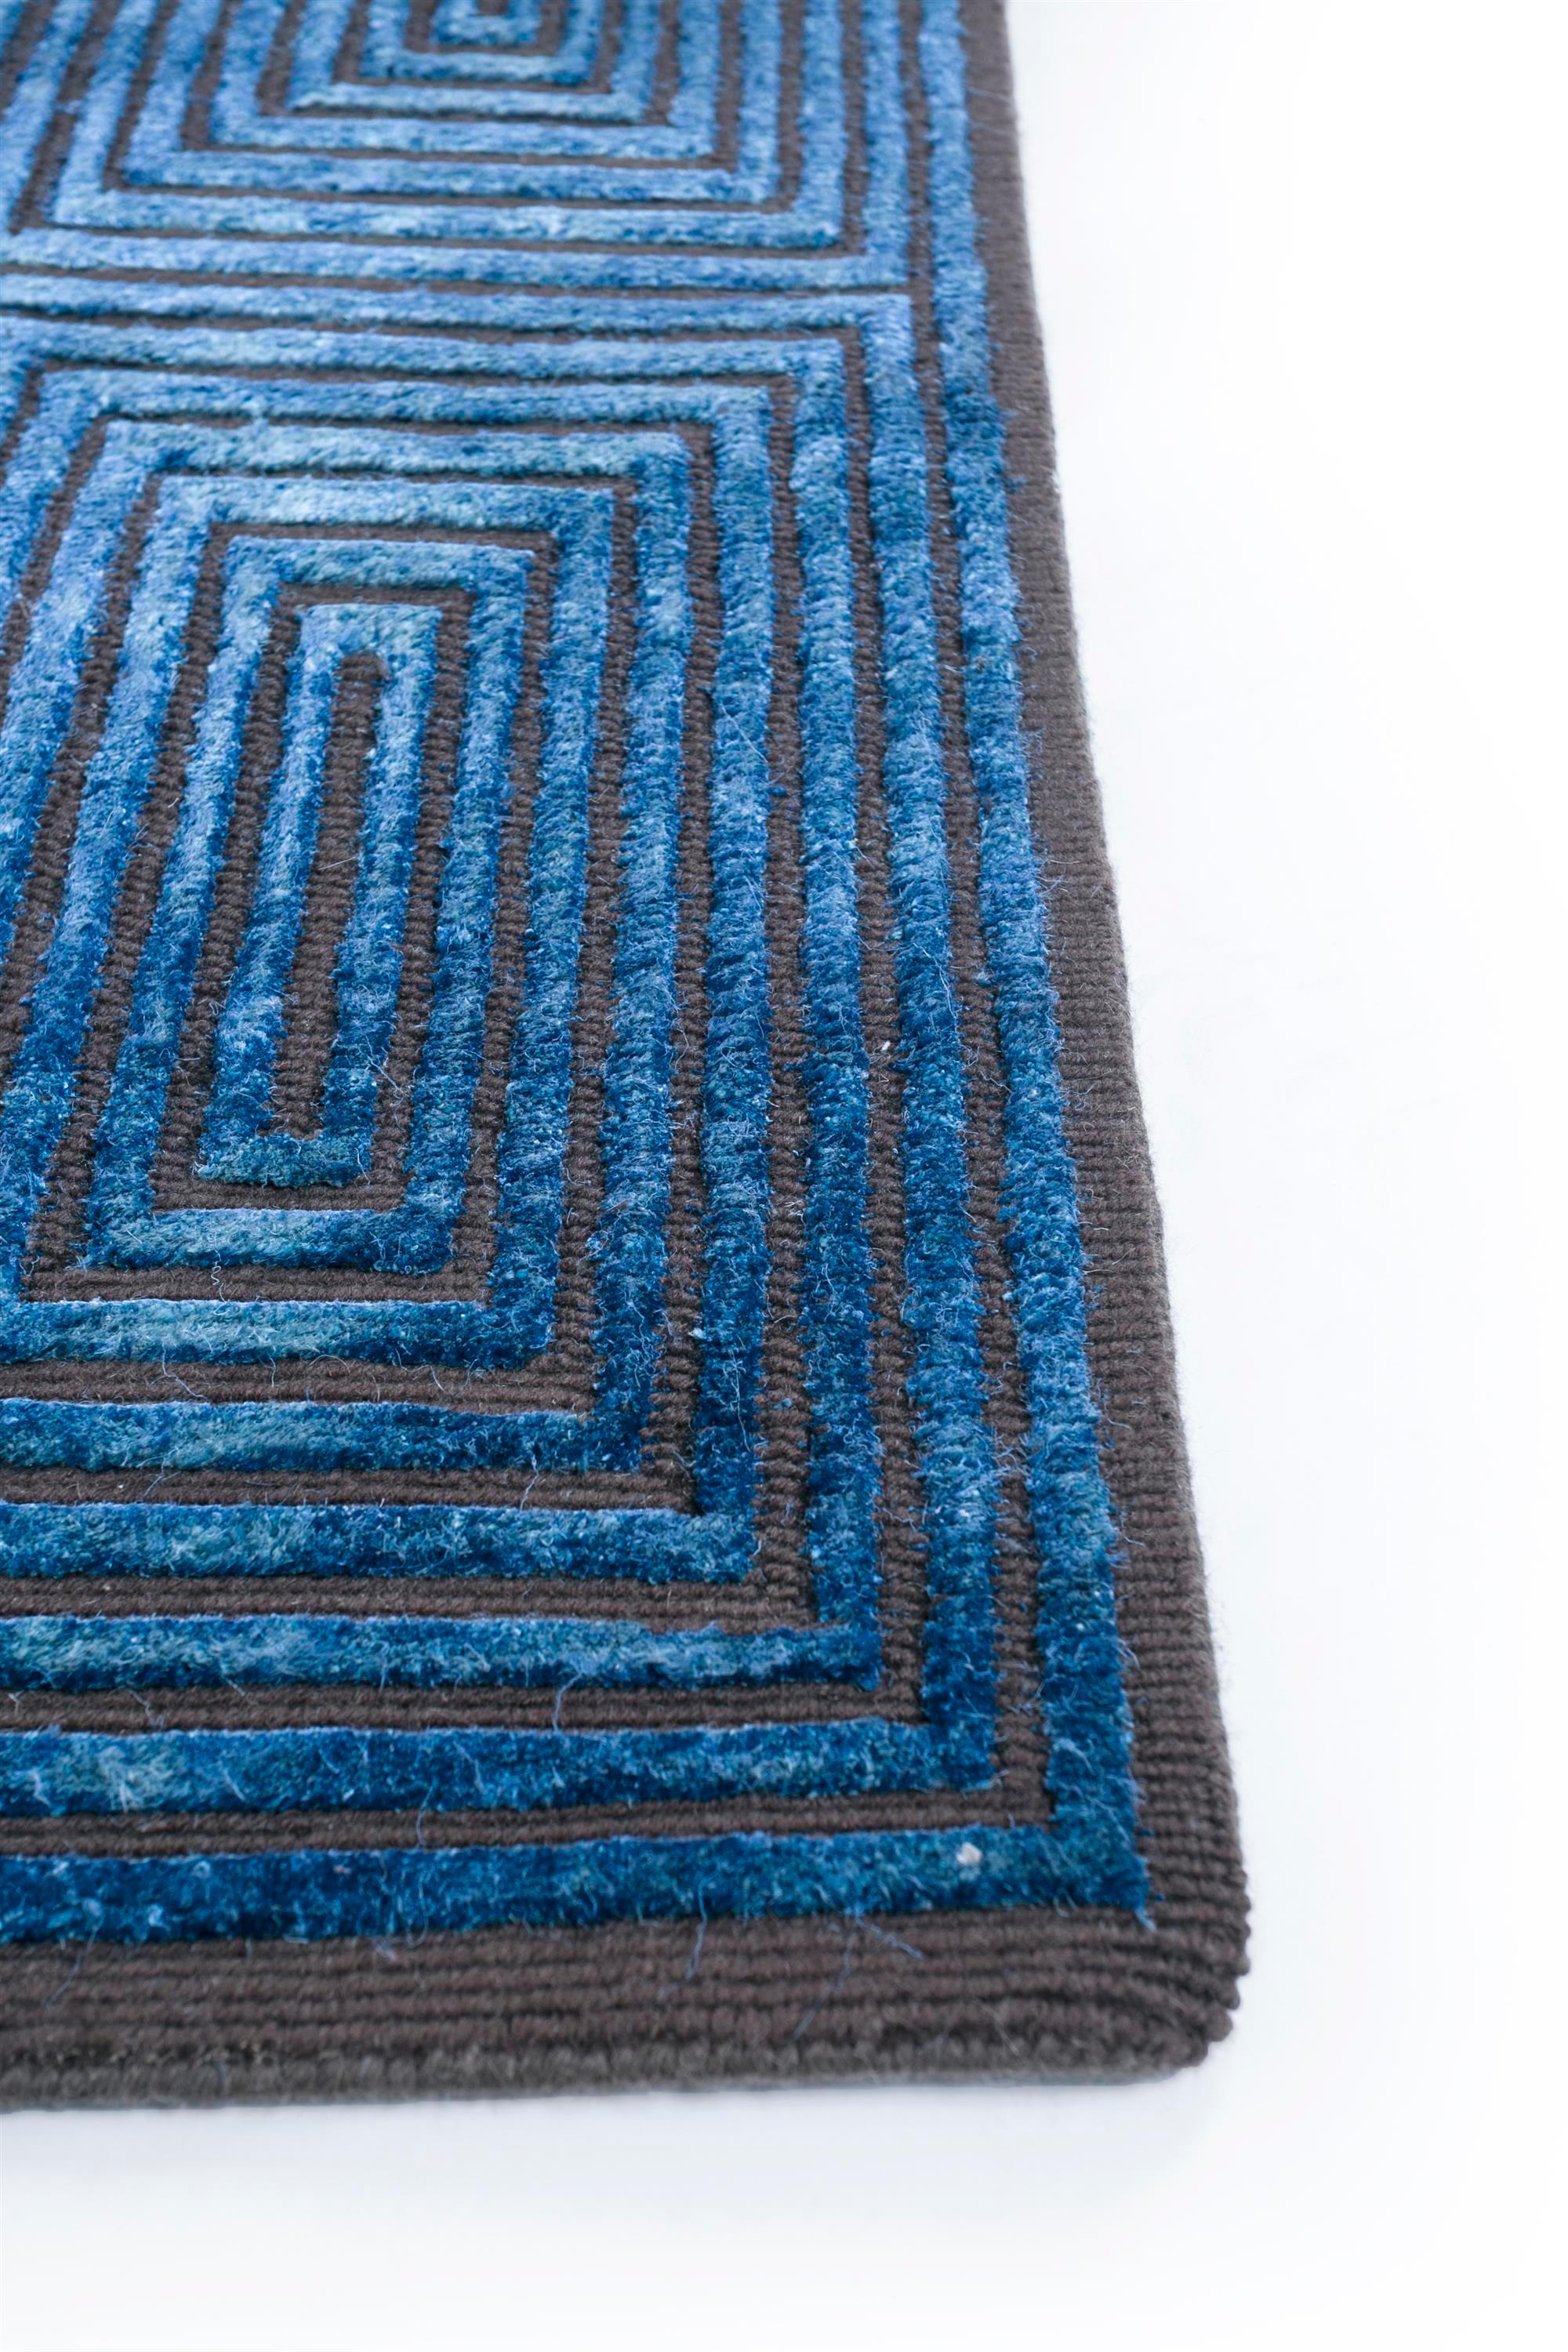 Minimalist  Cobalt Rug by Rural Weavers, Knotted, Wool, Silk, 180x270cm For Sale